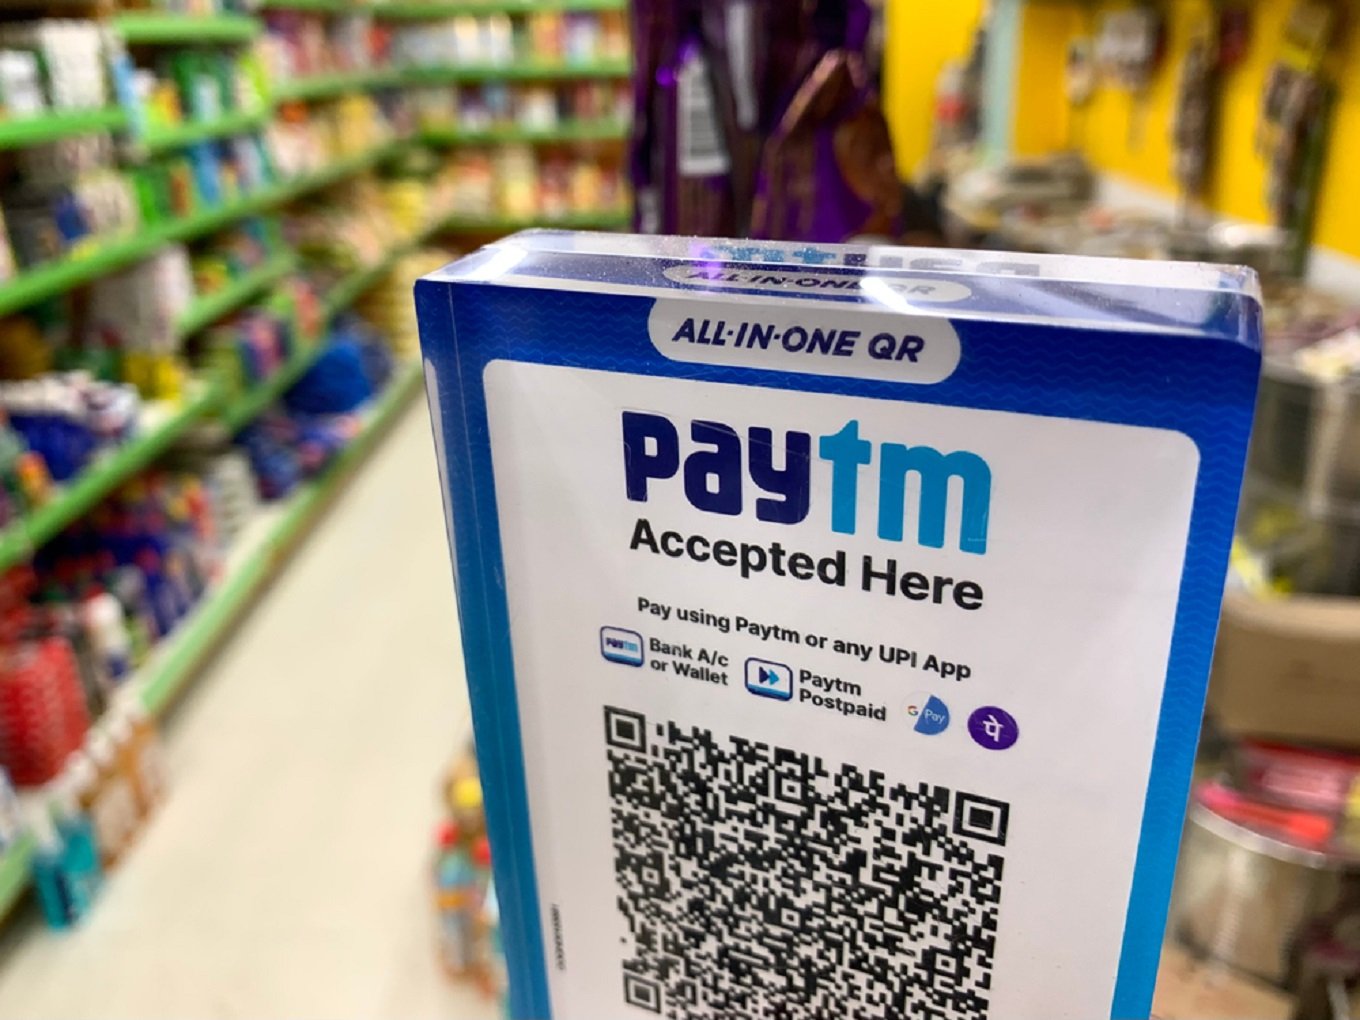 IPO-Bound Paytm Raises INR 920 Cr From Swiss Re For Its Insurance Business